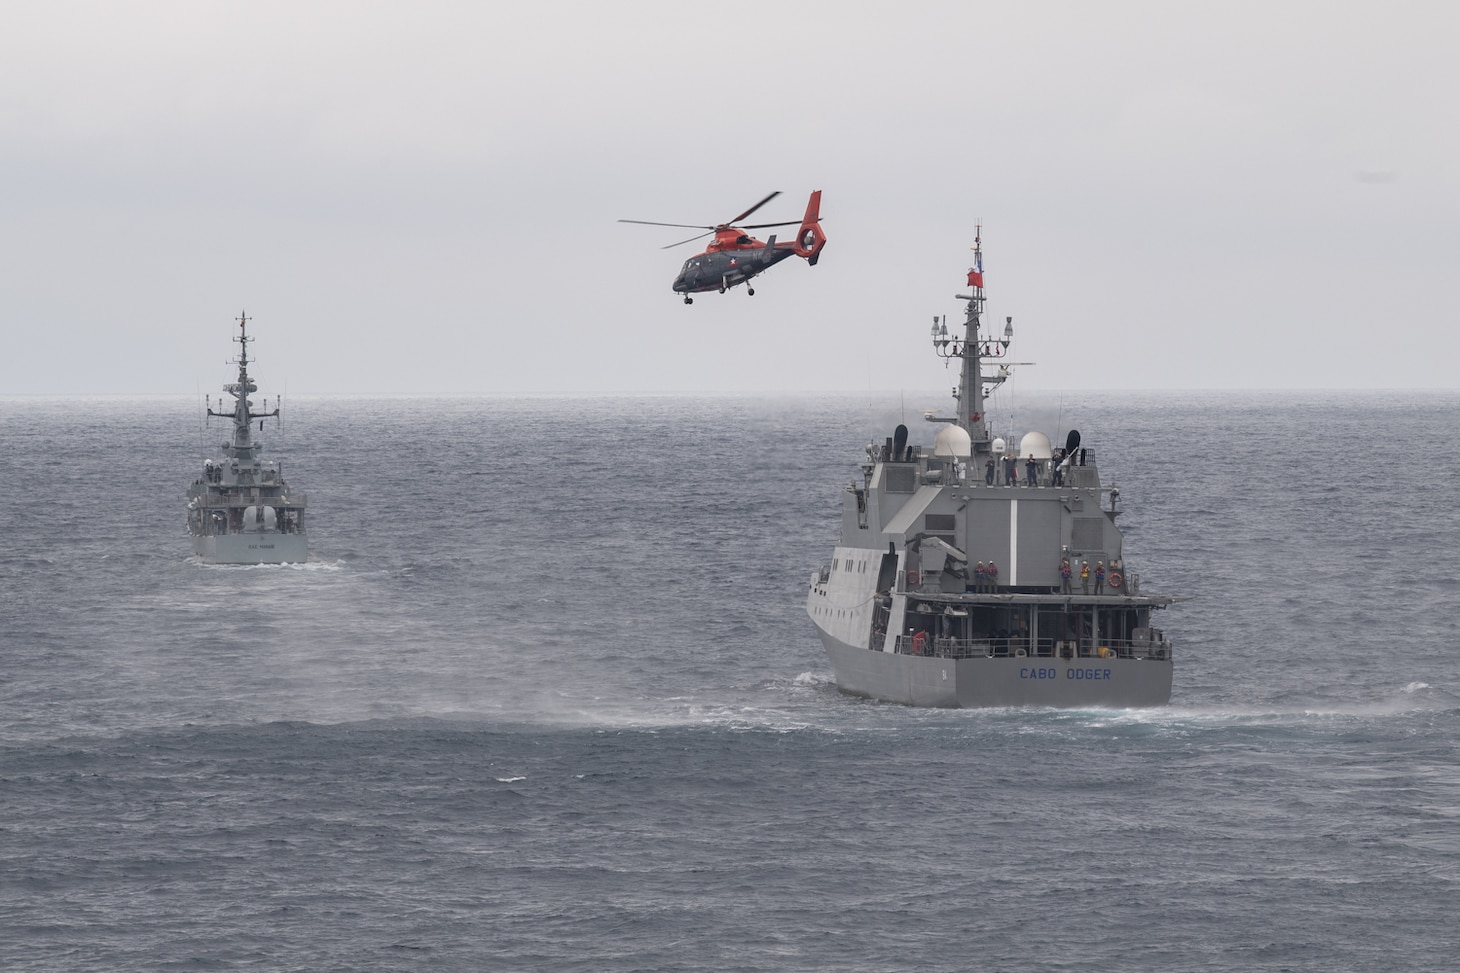 Chilean Navy vessel, Cabo Odger (OPV 84)  launches a helicopter during a training exercise for UNITAS LXI off the coast of Manta, Ecuador, Nov. 7, 2020.